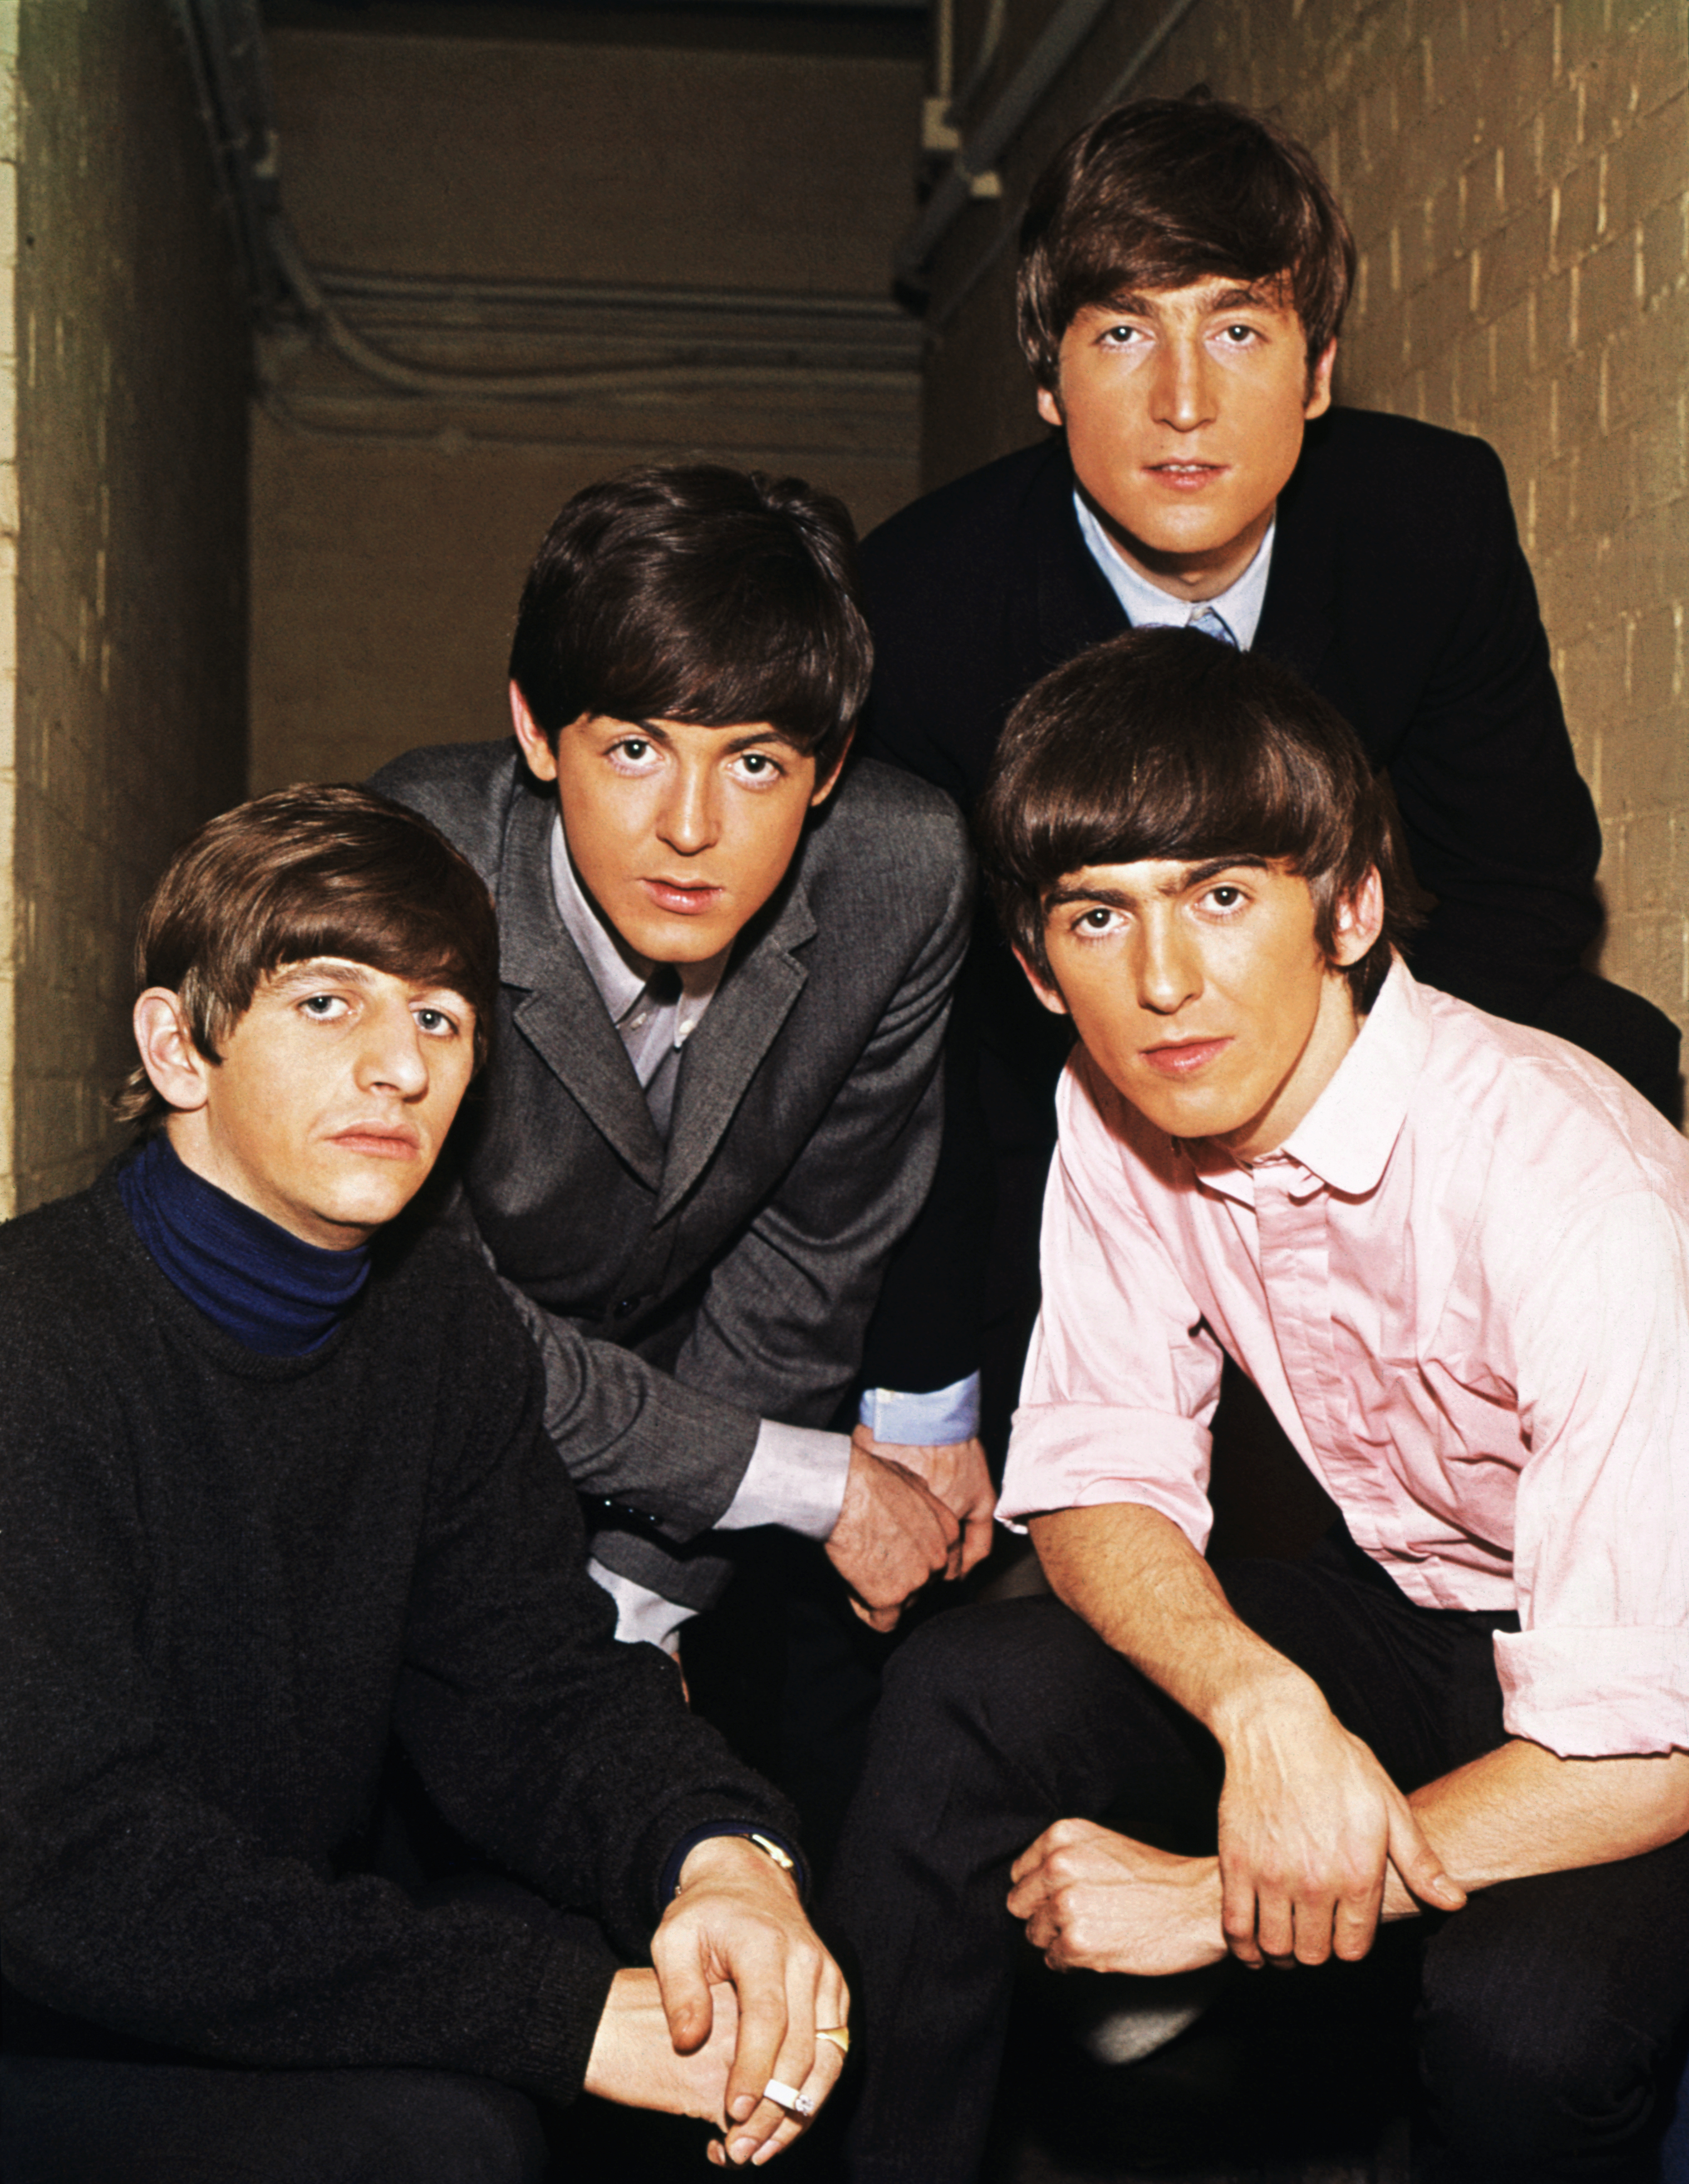 The Beatles, Paul McCartney, John Lennon, and George Harrison photographed in 1965 | Source: Getty Images